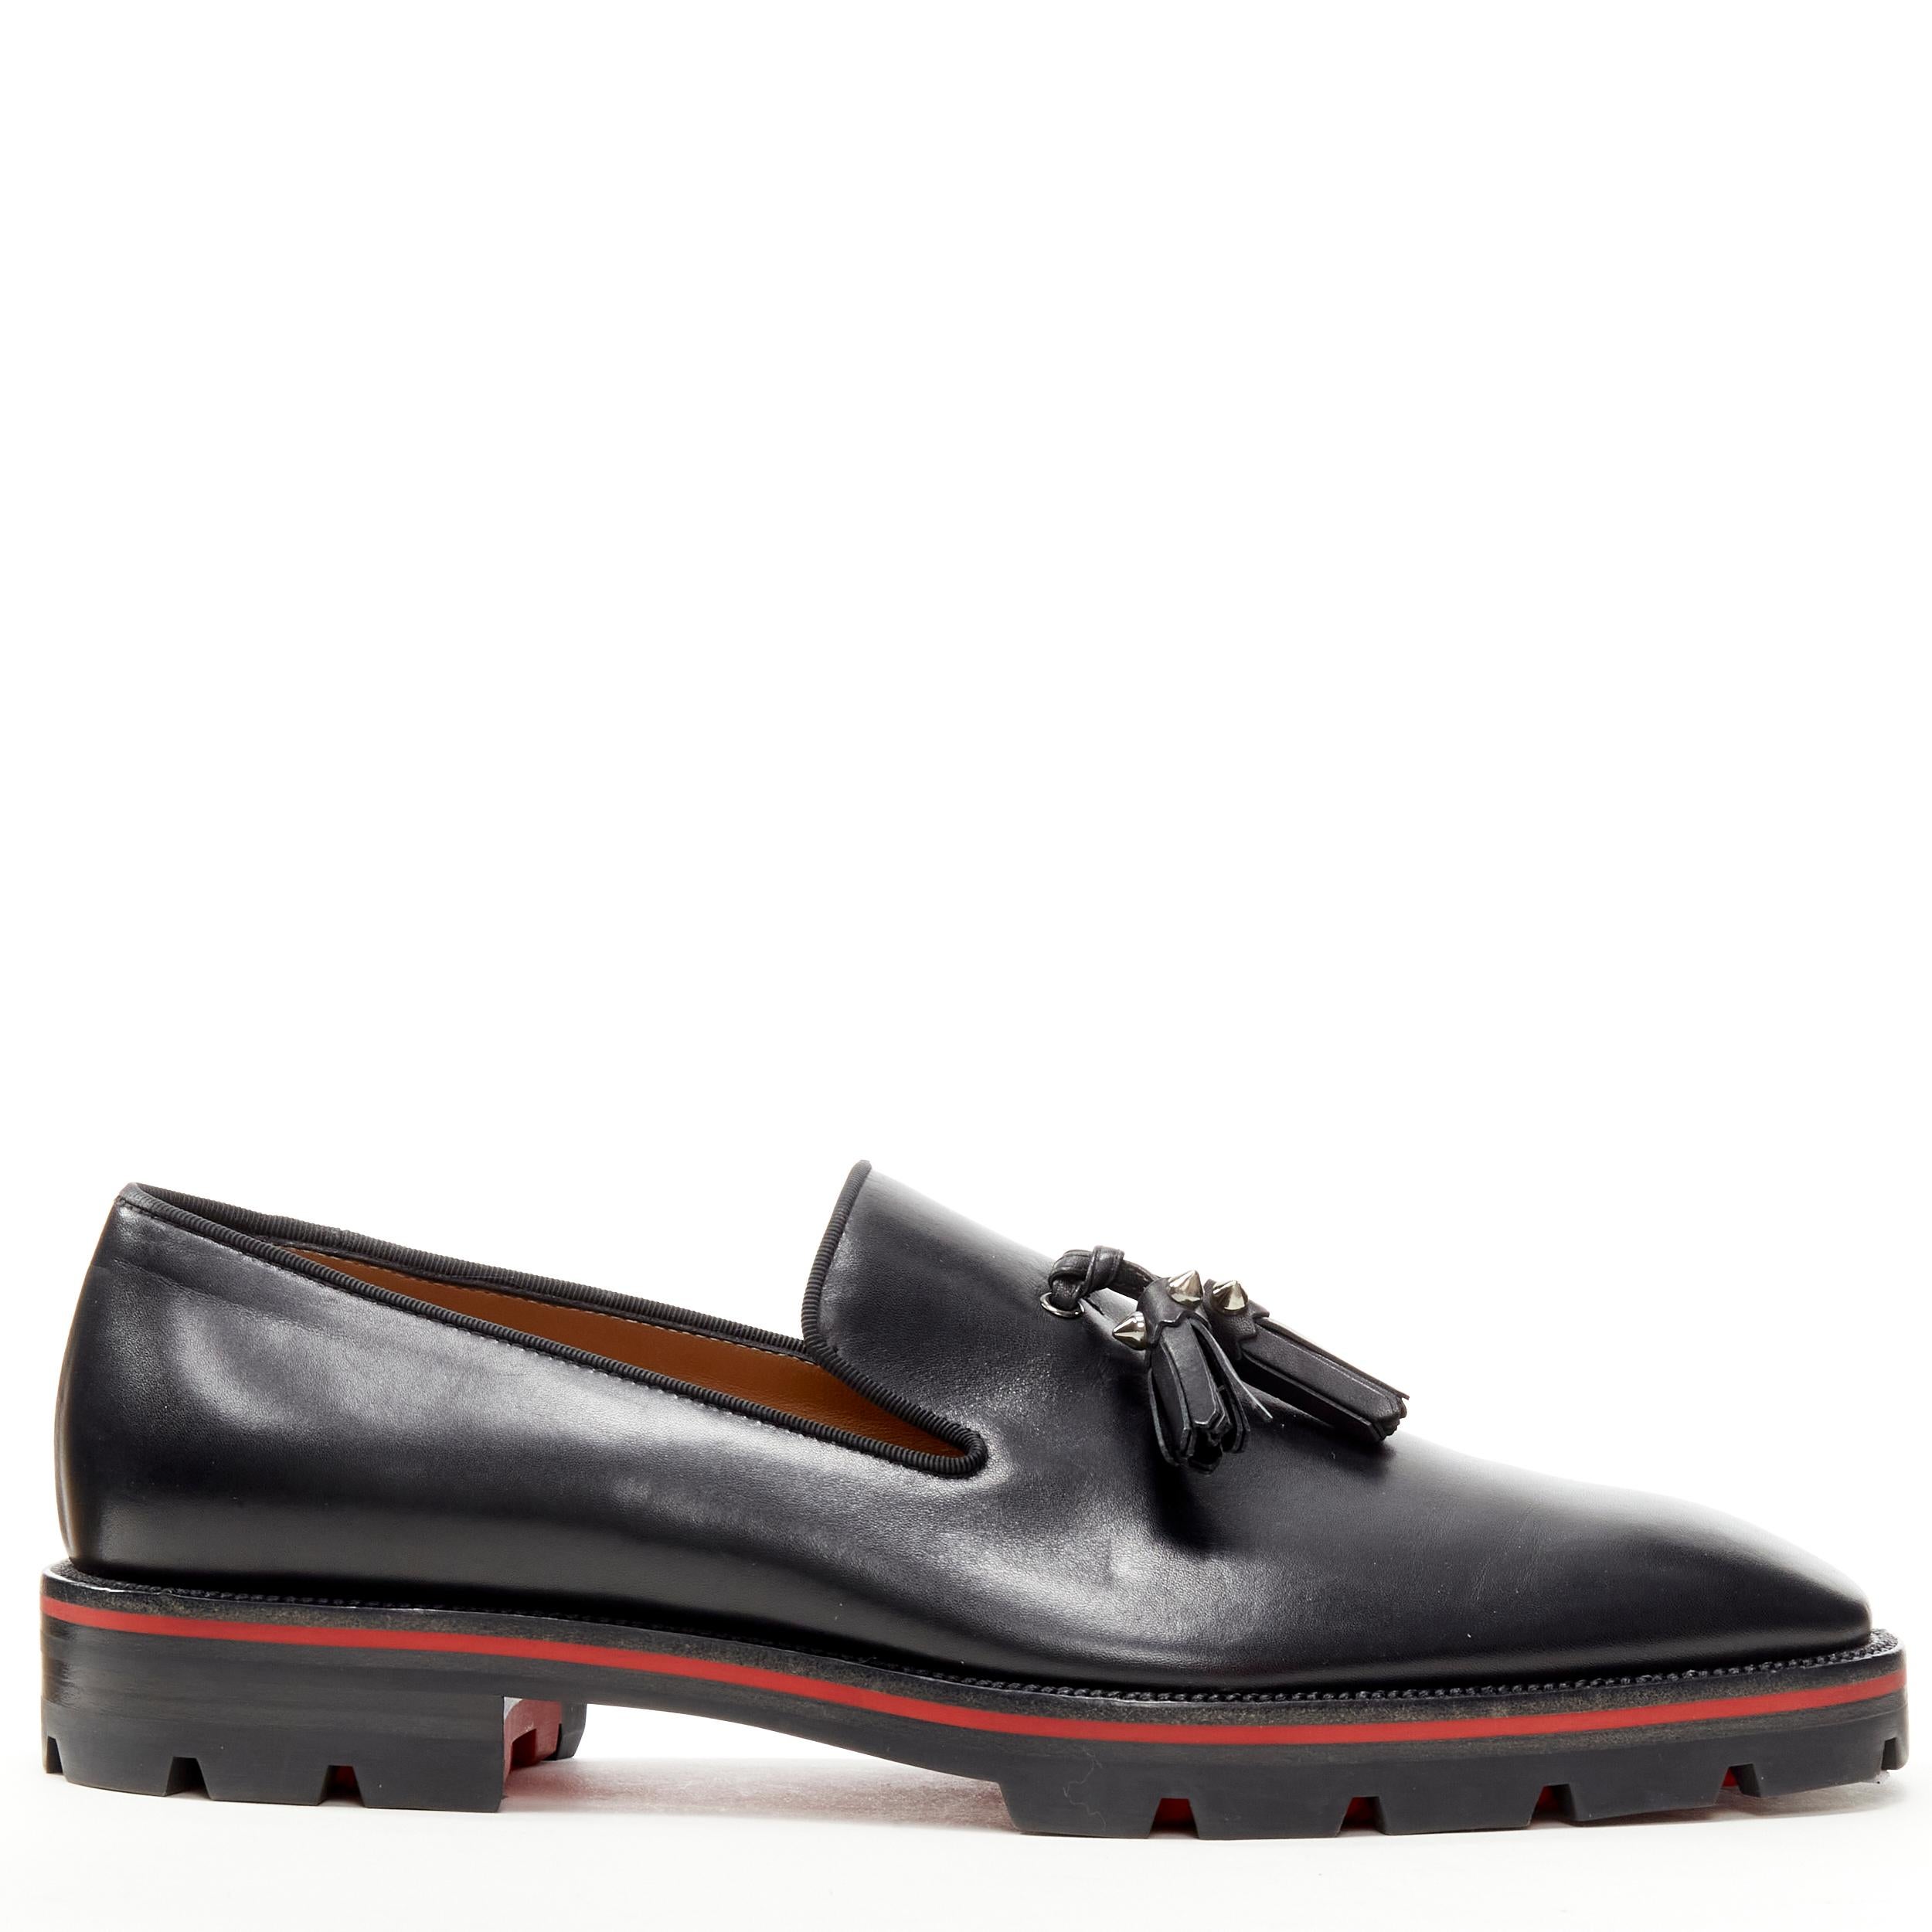 new CHRISTIAN LOUBOUTIN Luglion black leather tassel lug sole loafer EU42 
Reference: TGAS/C01141 
Brand: Christian Louboutin 
Designer: Christian Louboutin 
Model: Luglion 
Material: Leather 
Color: Black 
Pattern: Solid 
Extra Detail: Classic